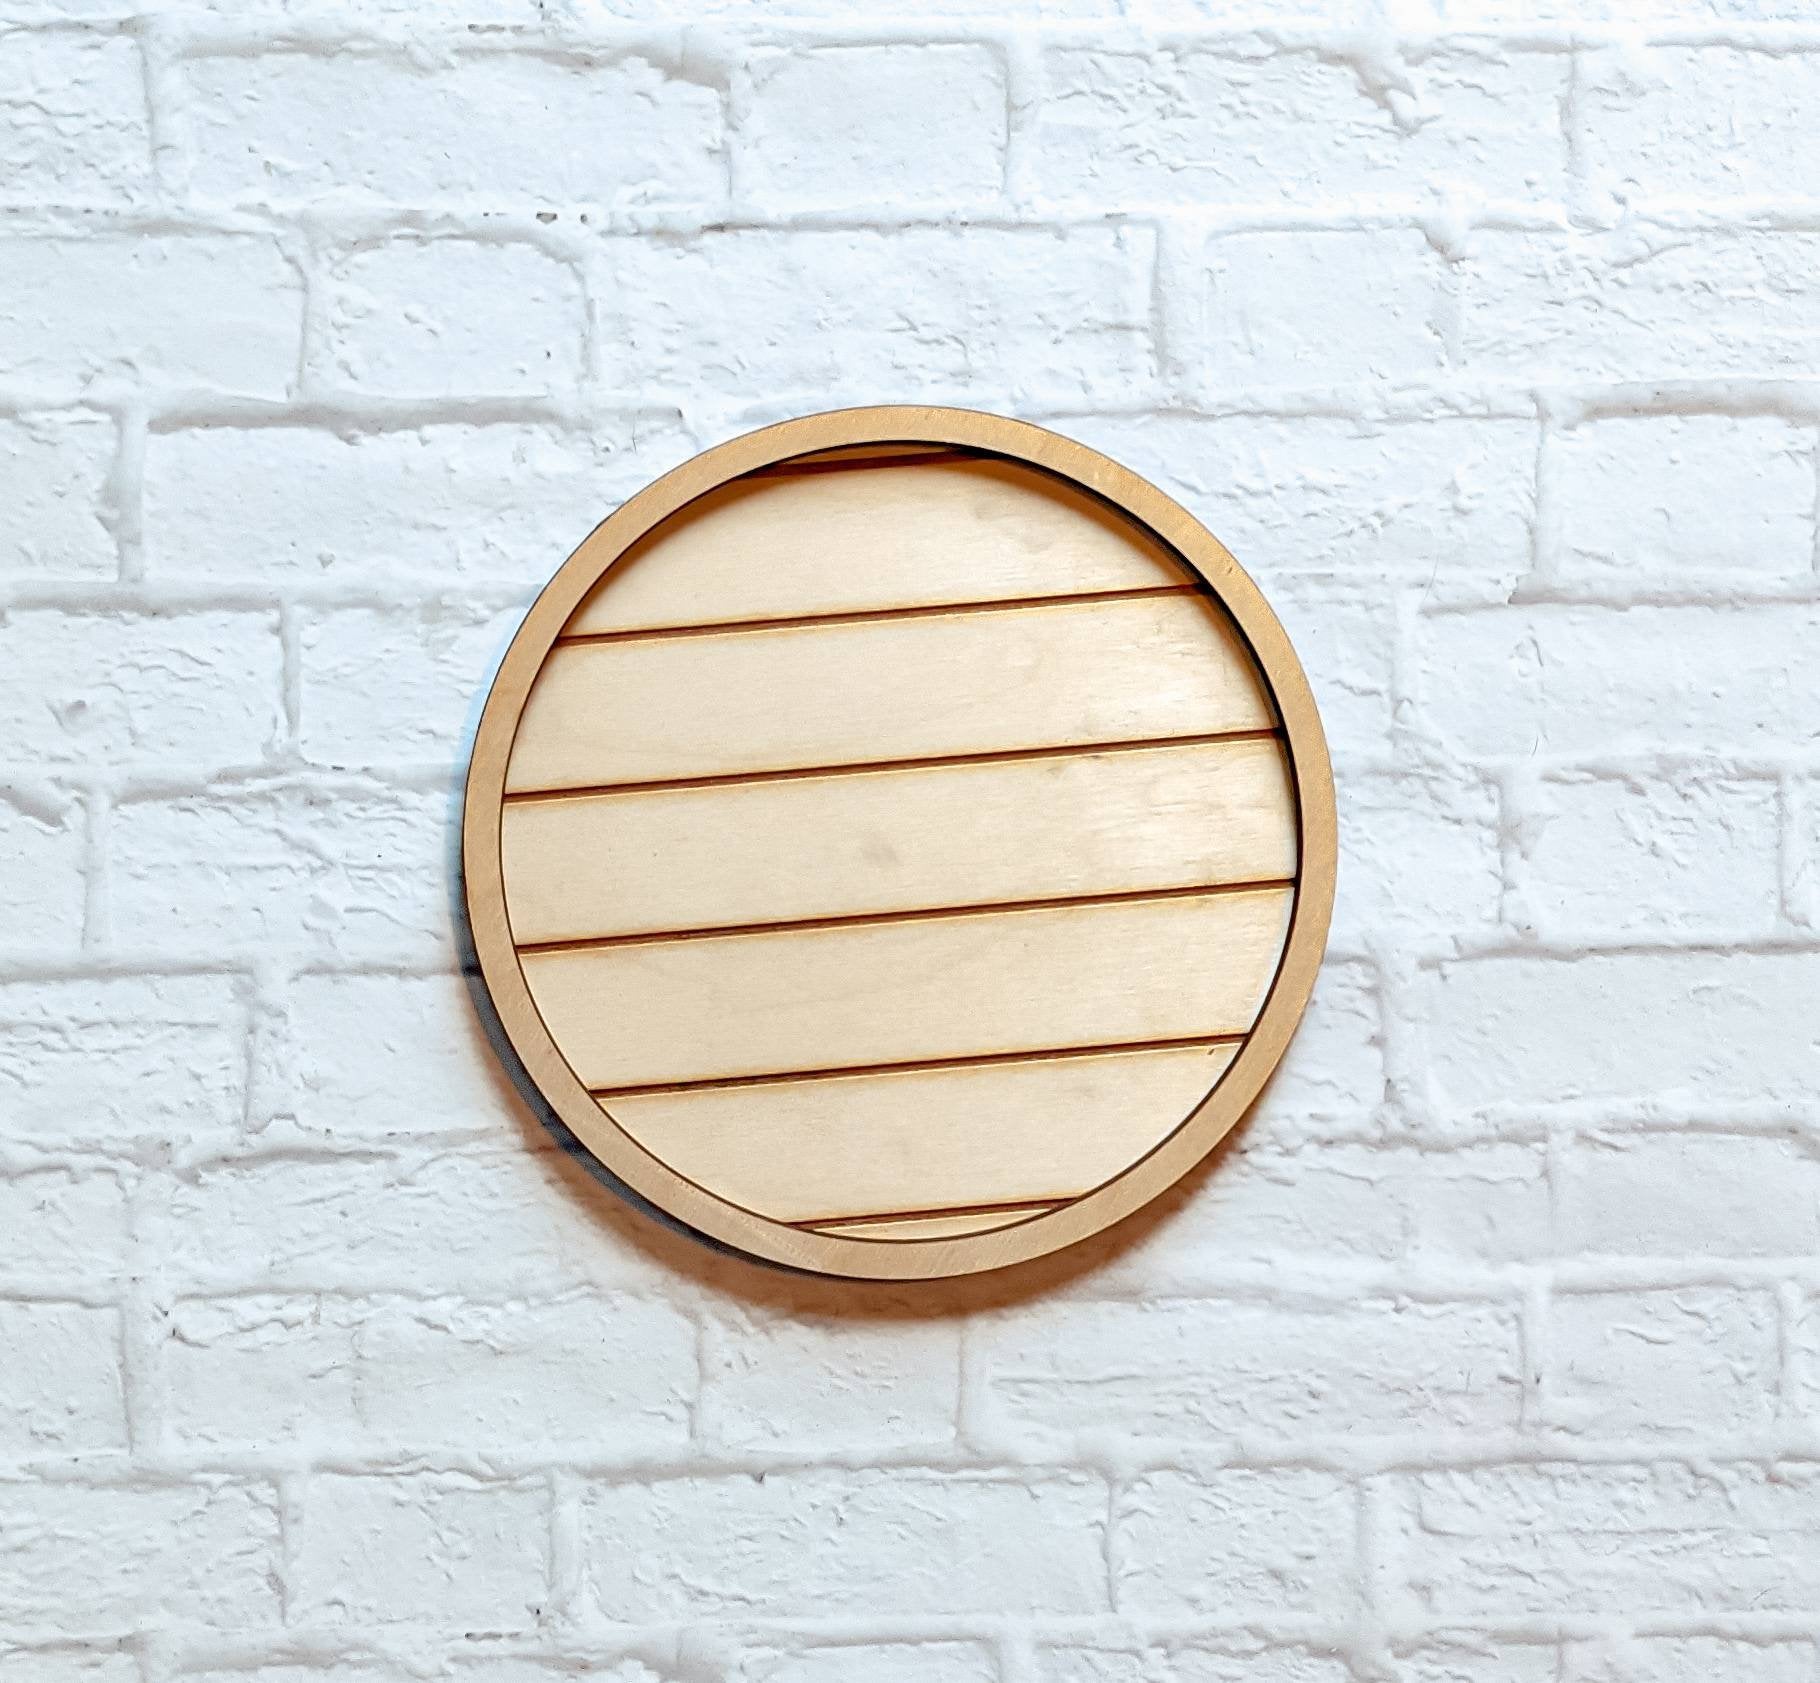 CIRCLE FAUX SHIPLAP sign backers with frame- Unfinished 1/4" Wood - Various Sizes - Wooden Blanks- Wooden Shapes - laser cut shape